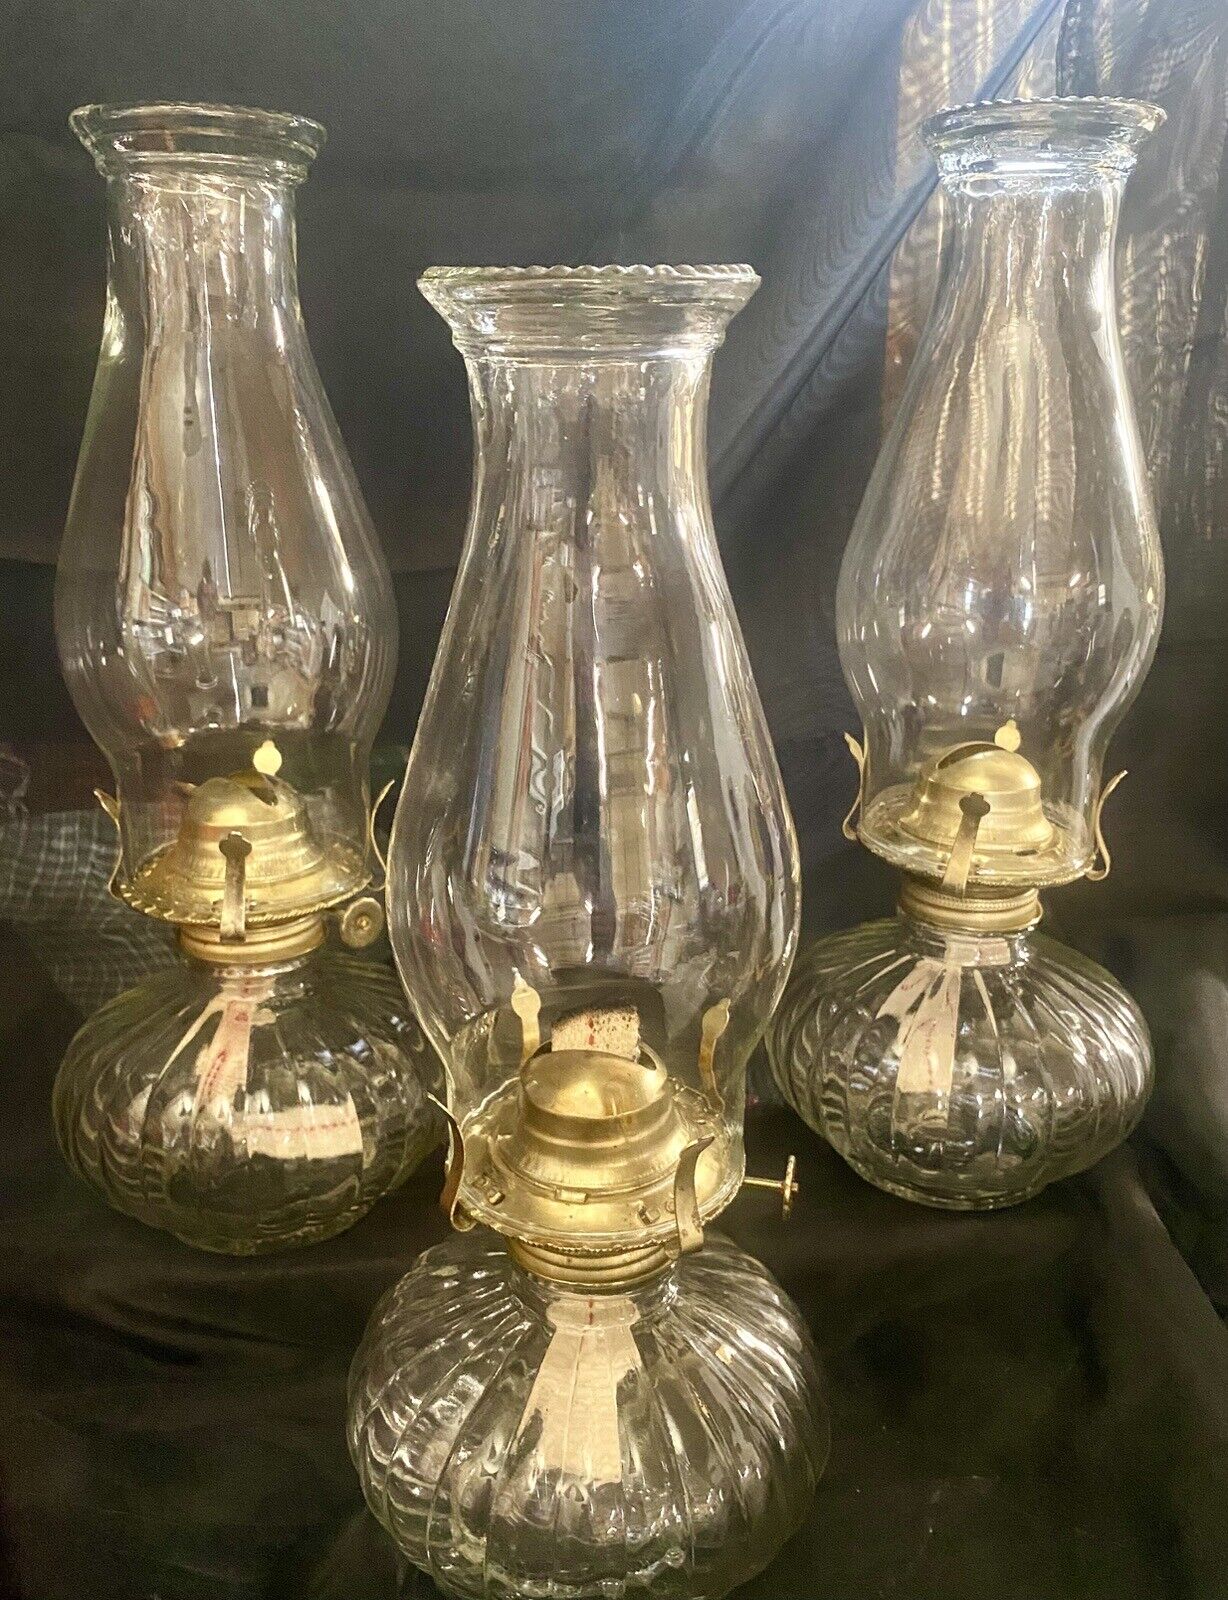 3 Vintage Clear Glass Oil Lamps Ribbed Design Golden Globe Trademark, Long Wick